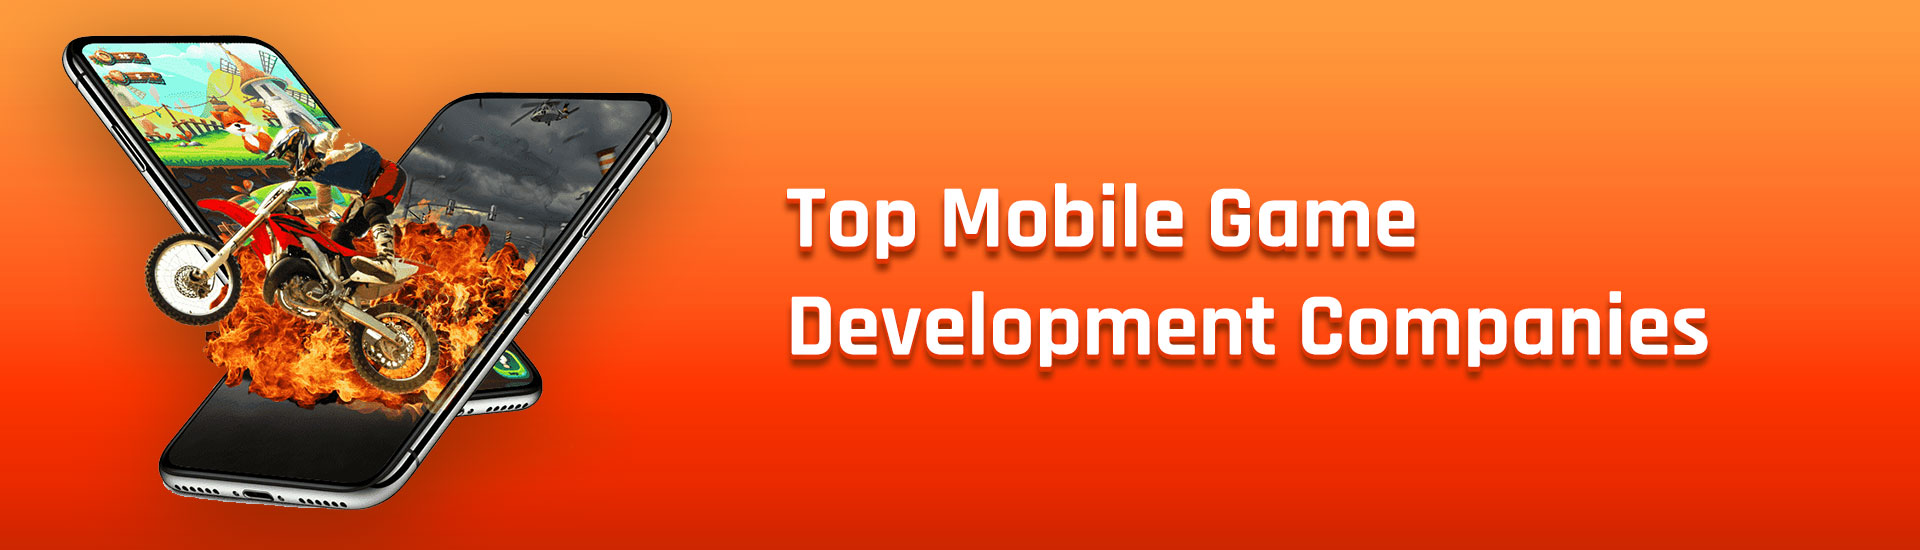 Top Mobile Game Development Companies Mobile Game Companies